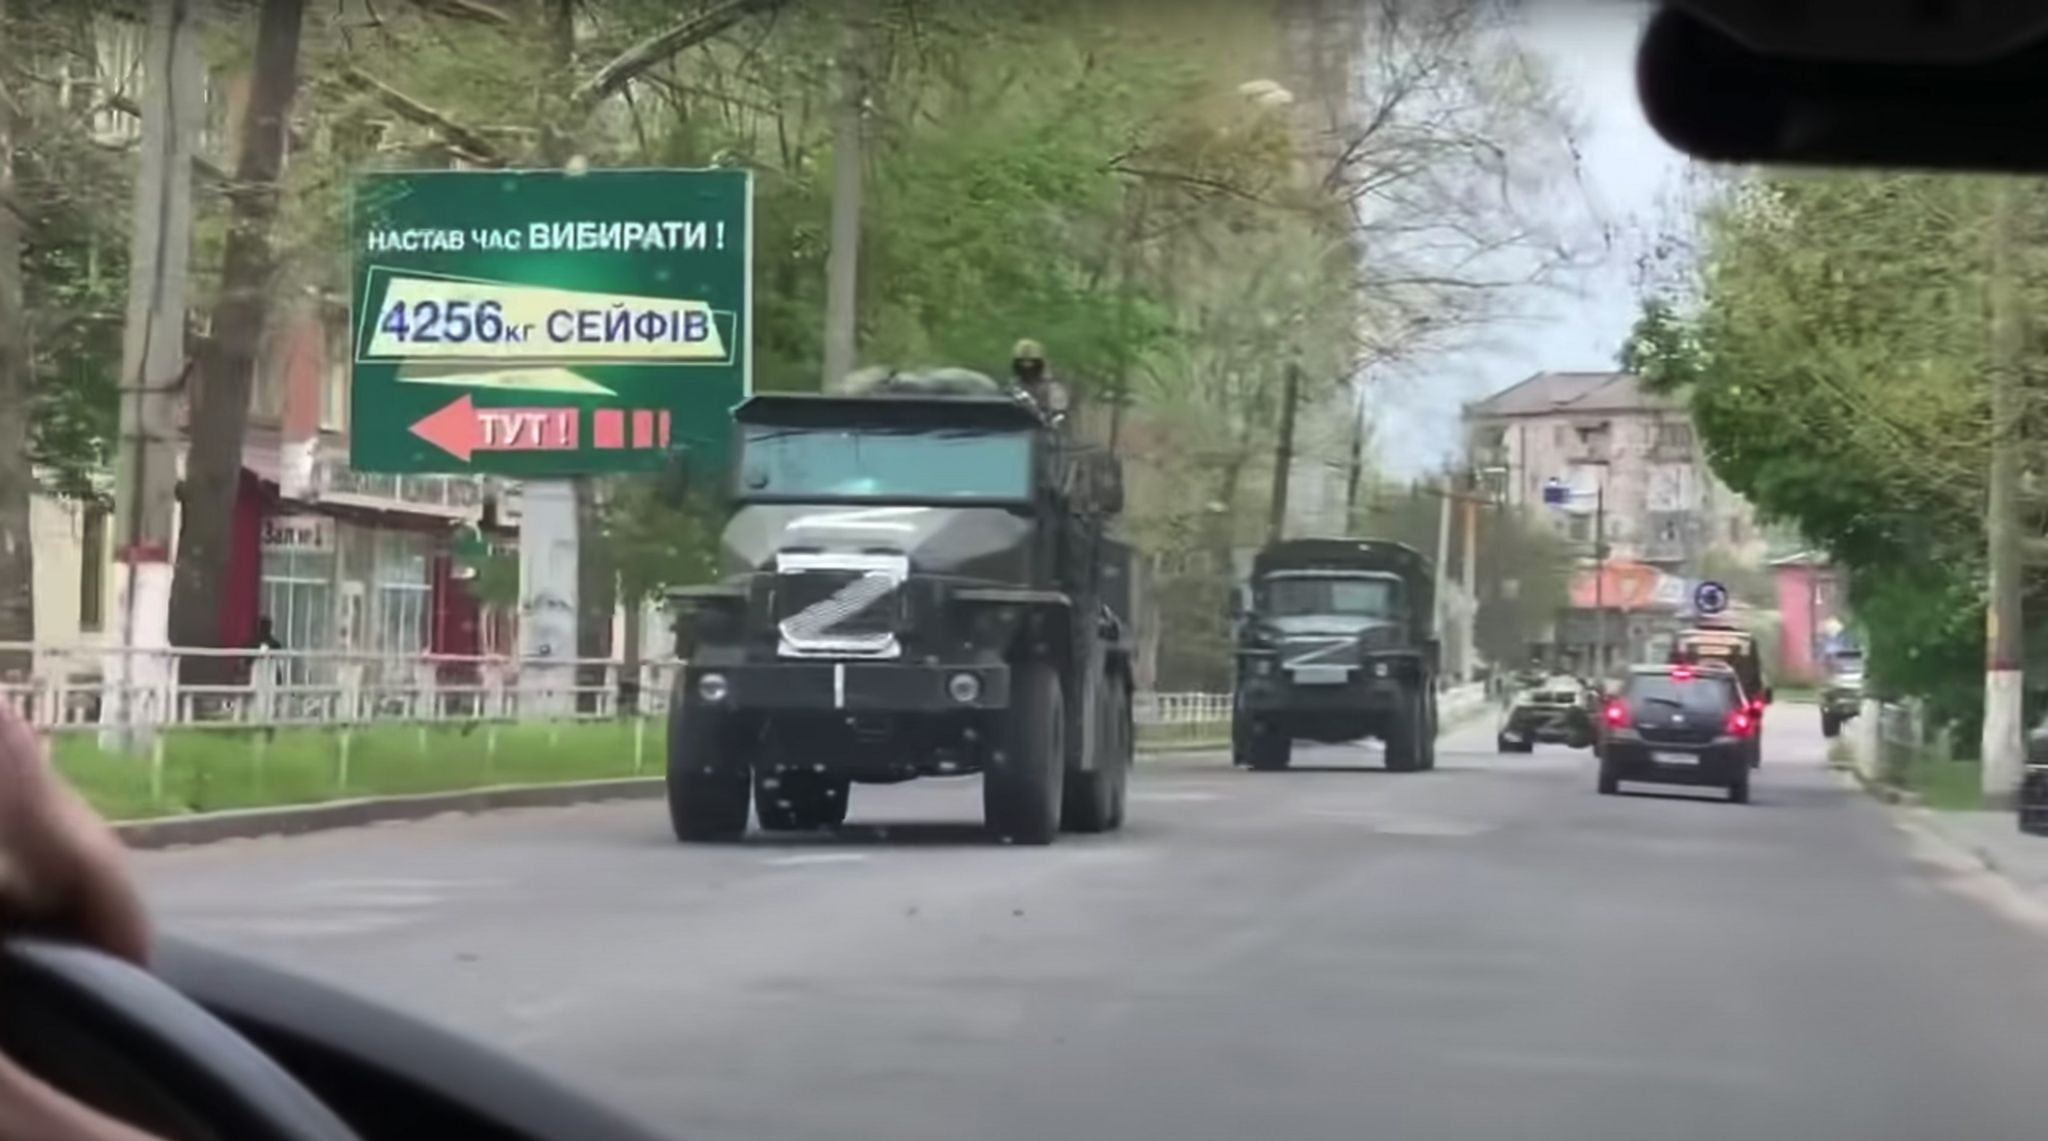 Large Russian Trucks with white Z painted on them drive down a street